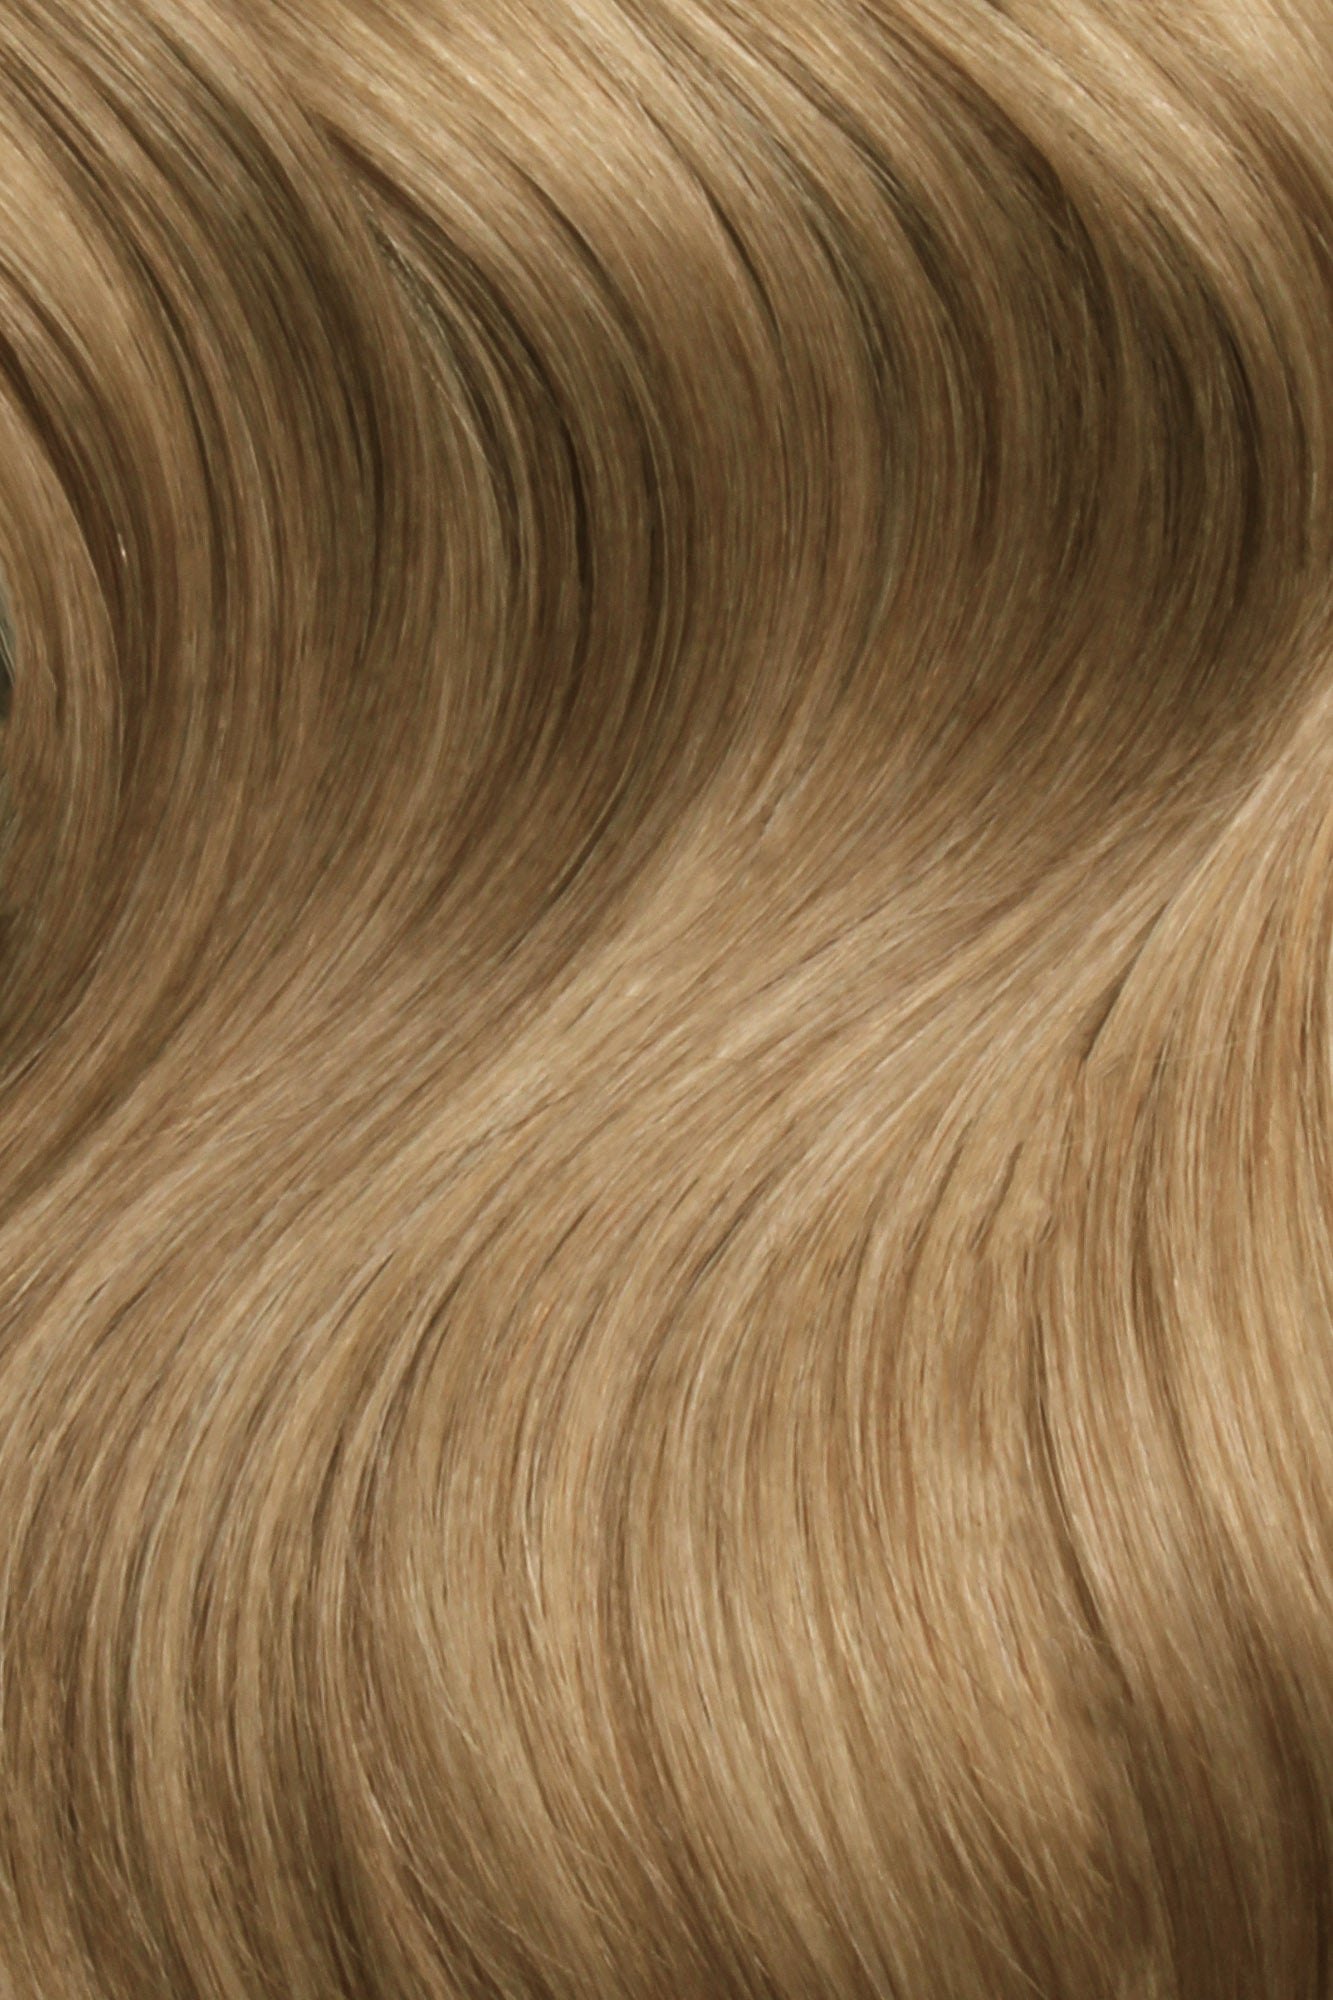 SEAMLESS® Flat Weft 24 Inches - SWAY Hair Extensions Natural SEAMLESS® Flat Weft 24 Inches extensions. Thin, flexible, and discreet. 100% Double Drawn Remy Human Hair. Versatile and reusable